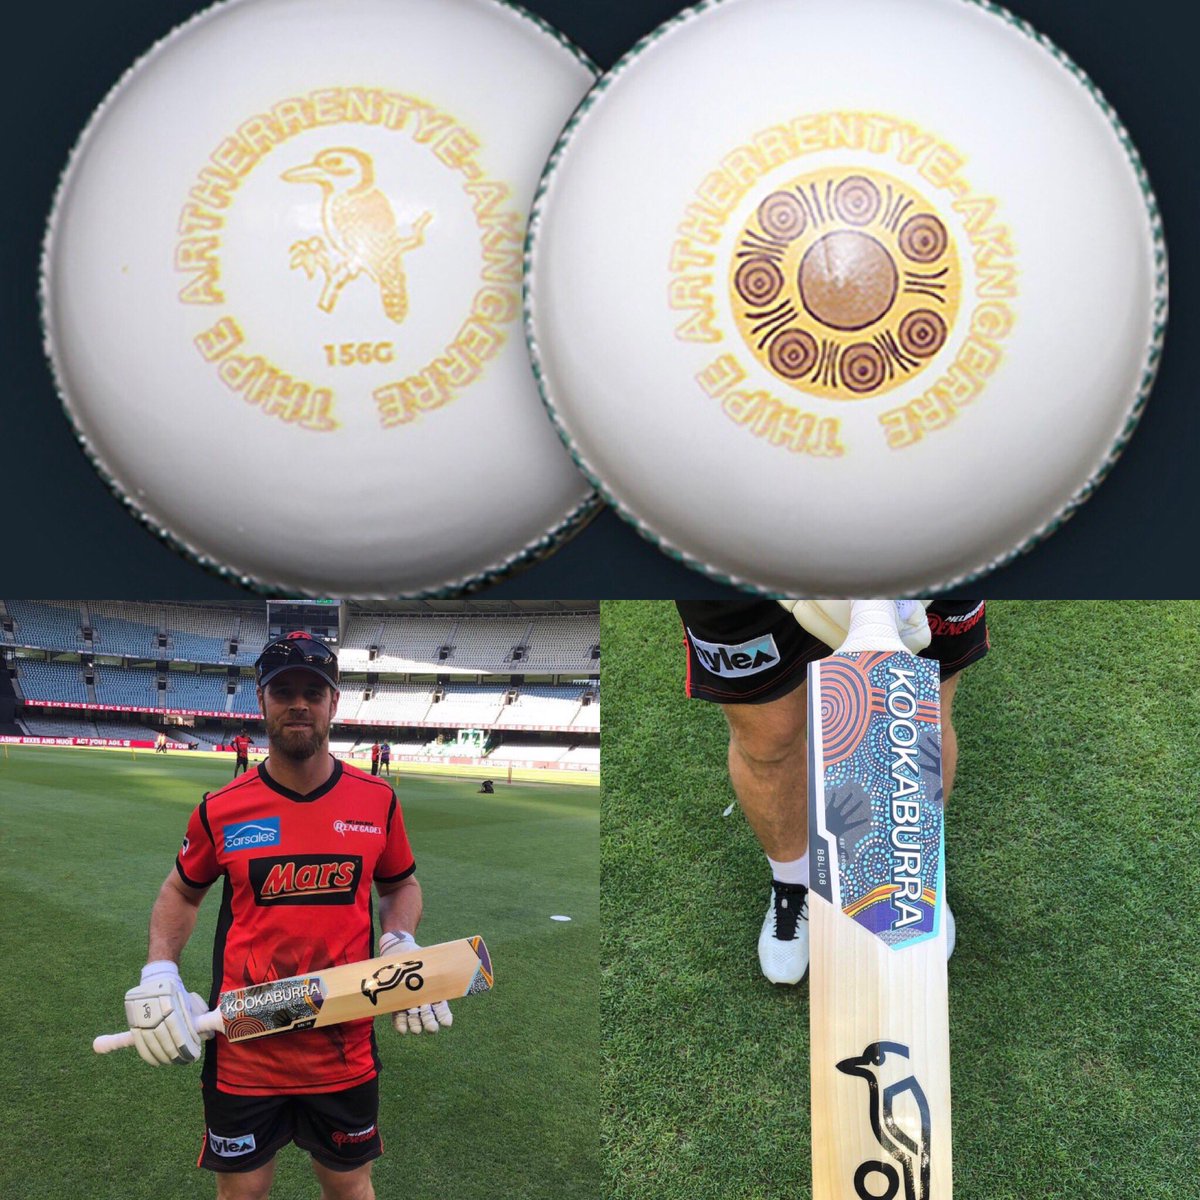 Today @7Cricket features the longest cricket dating back to 1868 involving Aboriginal cricketers. Then @StrikersBBL v @ScorchersBBL for the @dizzy259 Trophy in amazing jerseys + @KookaburraCkt produced an Indigenous ball with Alex Carey making use of @danchristian54 bat 🔴💛⚫️🏏